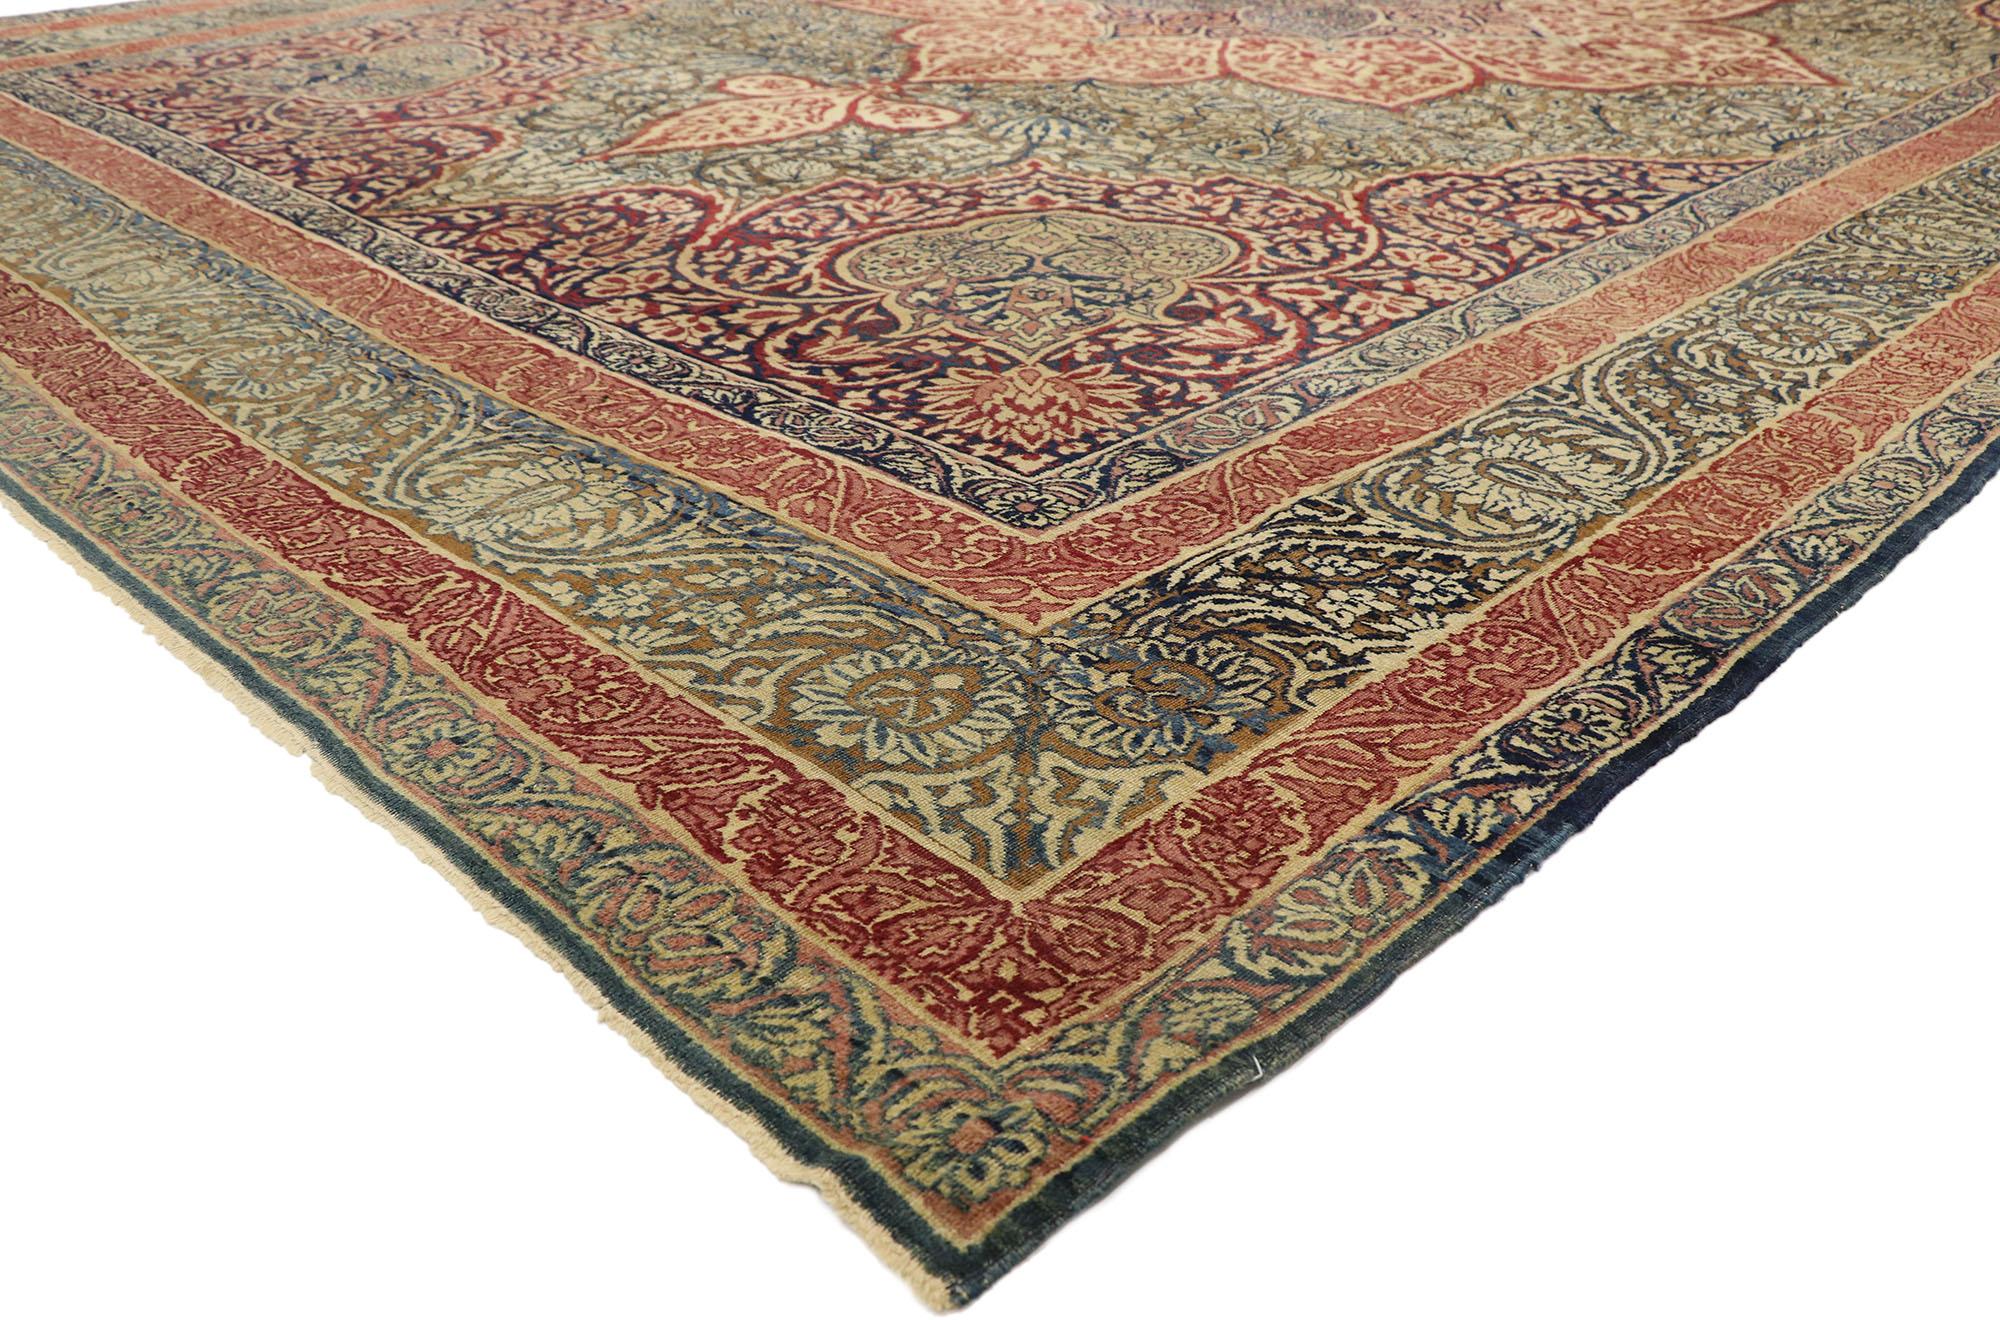 73364, antique Persian Kermanshah rug with William Morris Arts & Crafts style. The architectural elements of naturalistic forms combined with Arts & Crafts style, this hand knotted wool antique Persian Kermanshah rug astounds with its beauty and